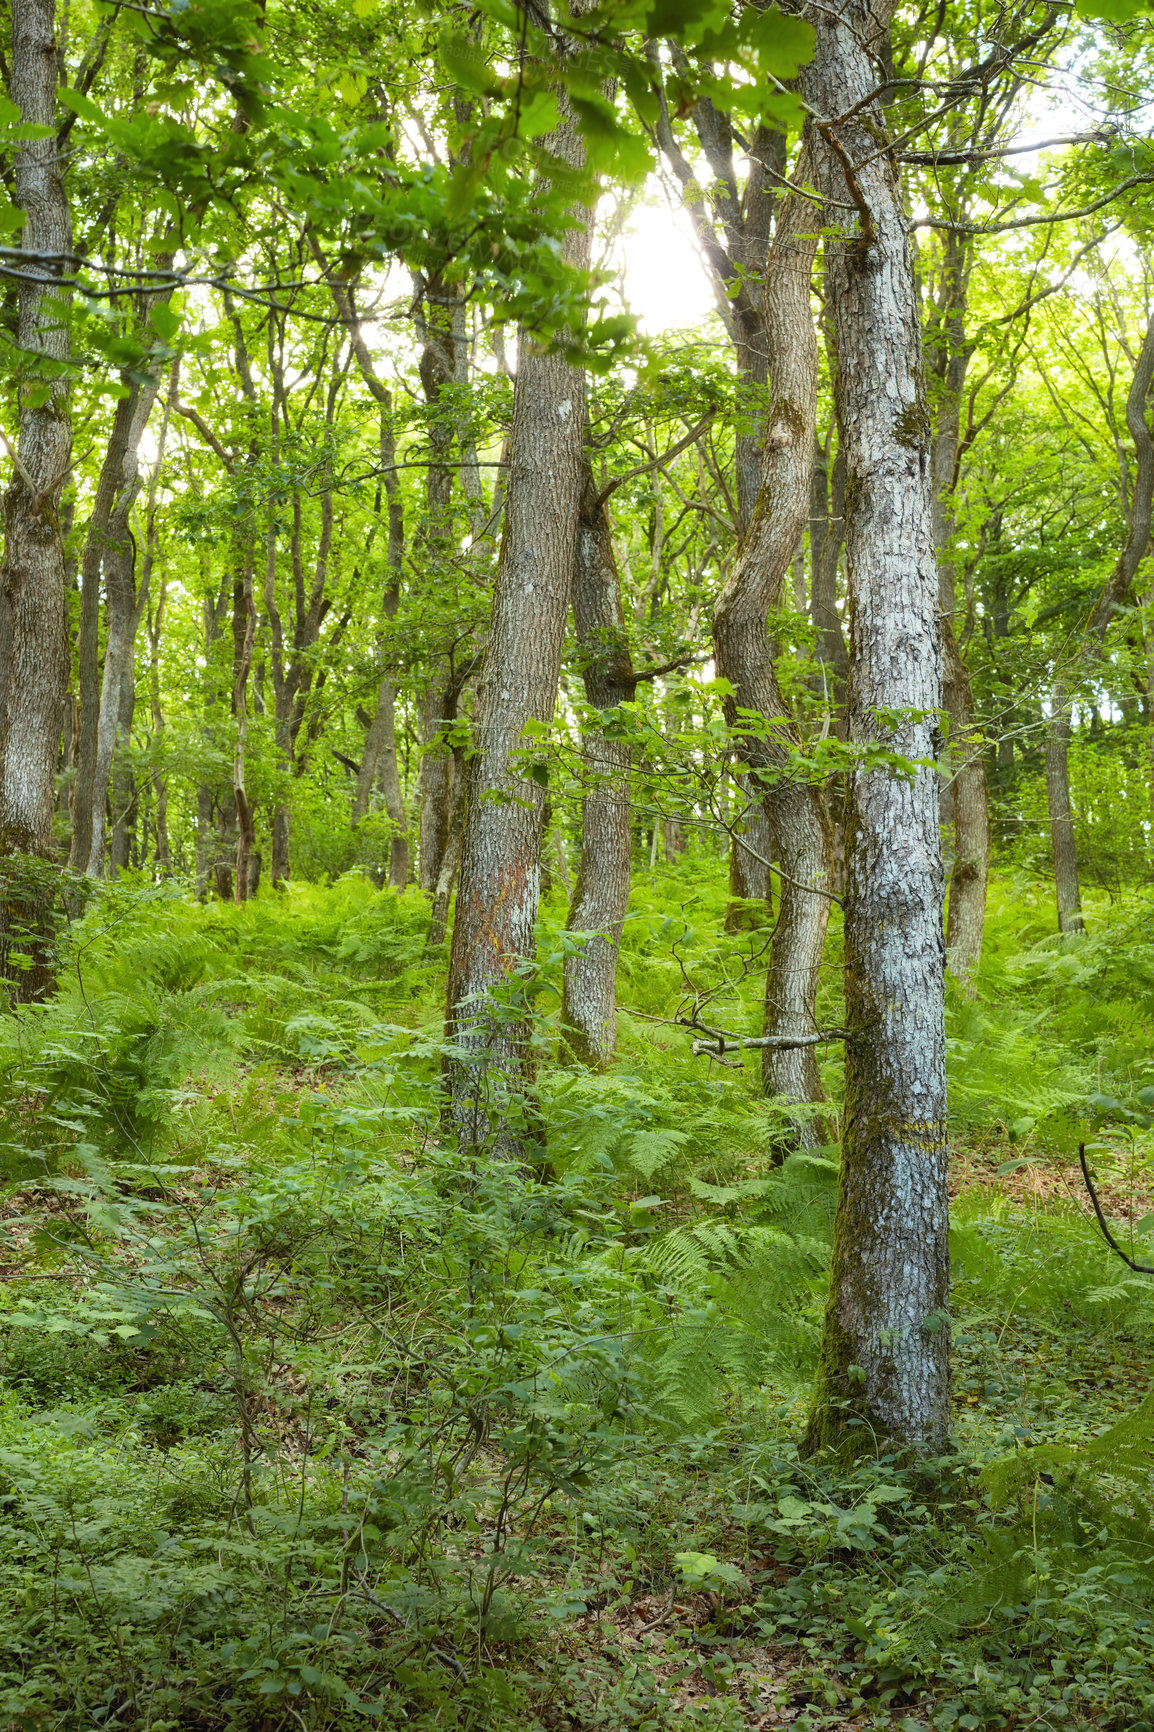 Buy stock photo Hardwood forest uncultivated - DenmarkA photo of green and lush forest in springtime